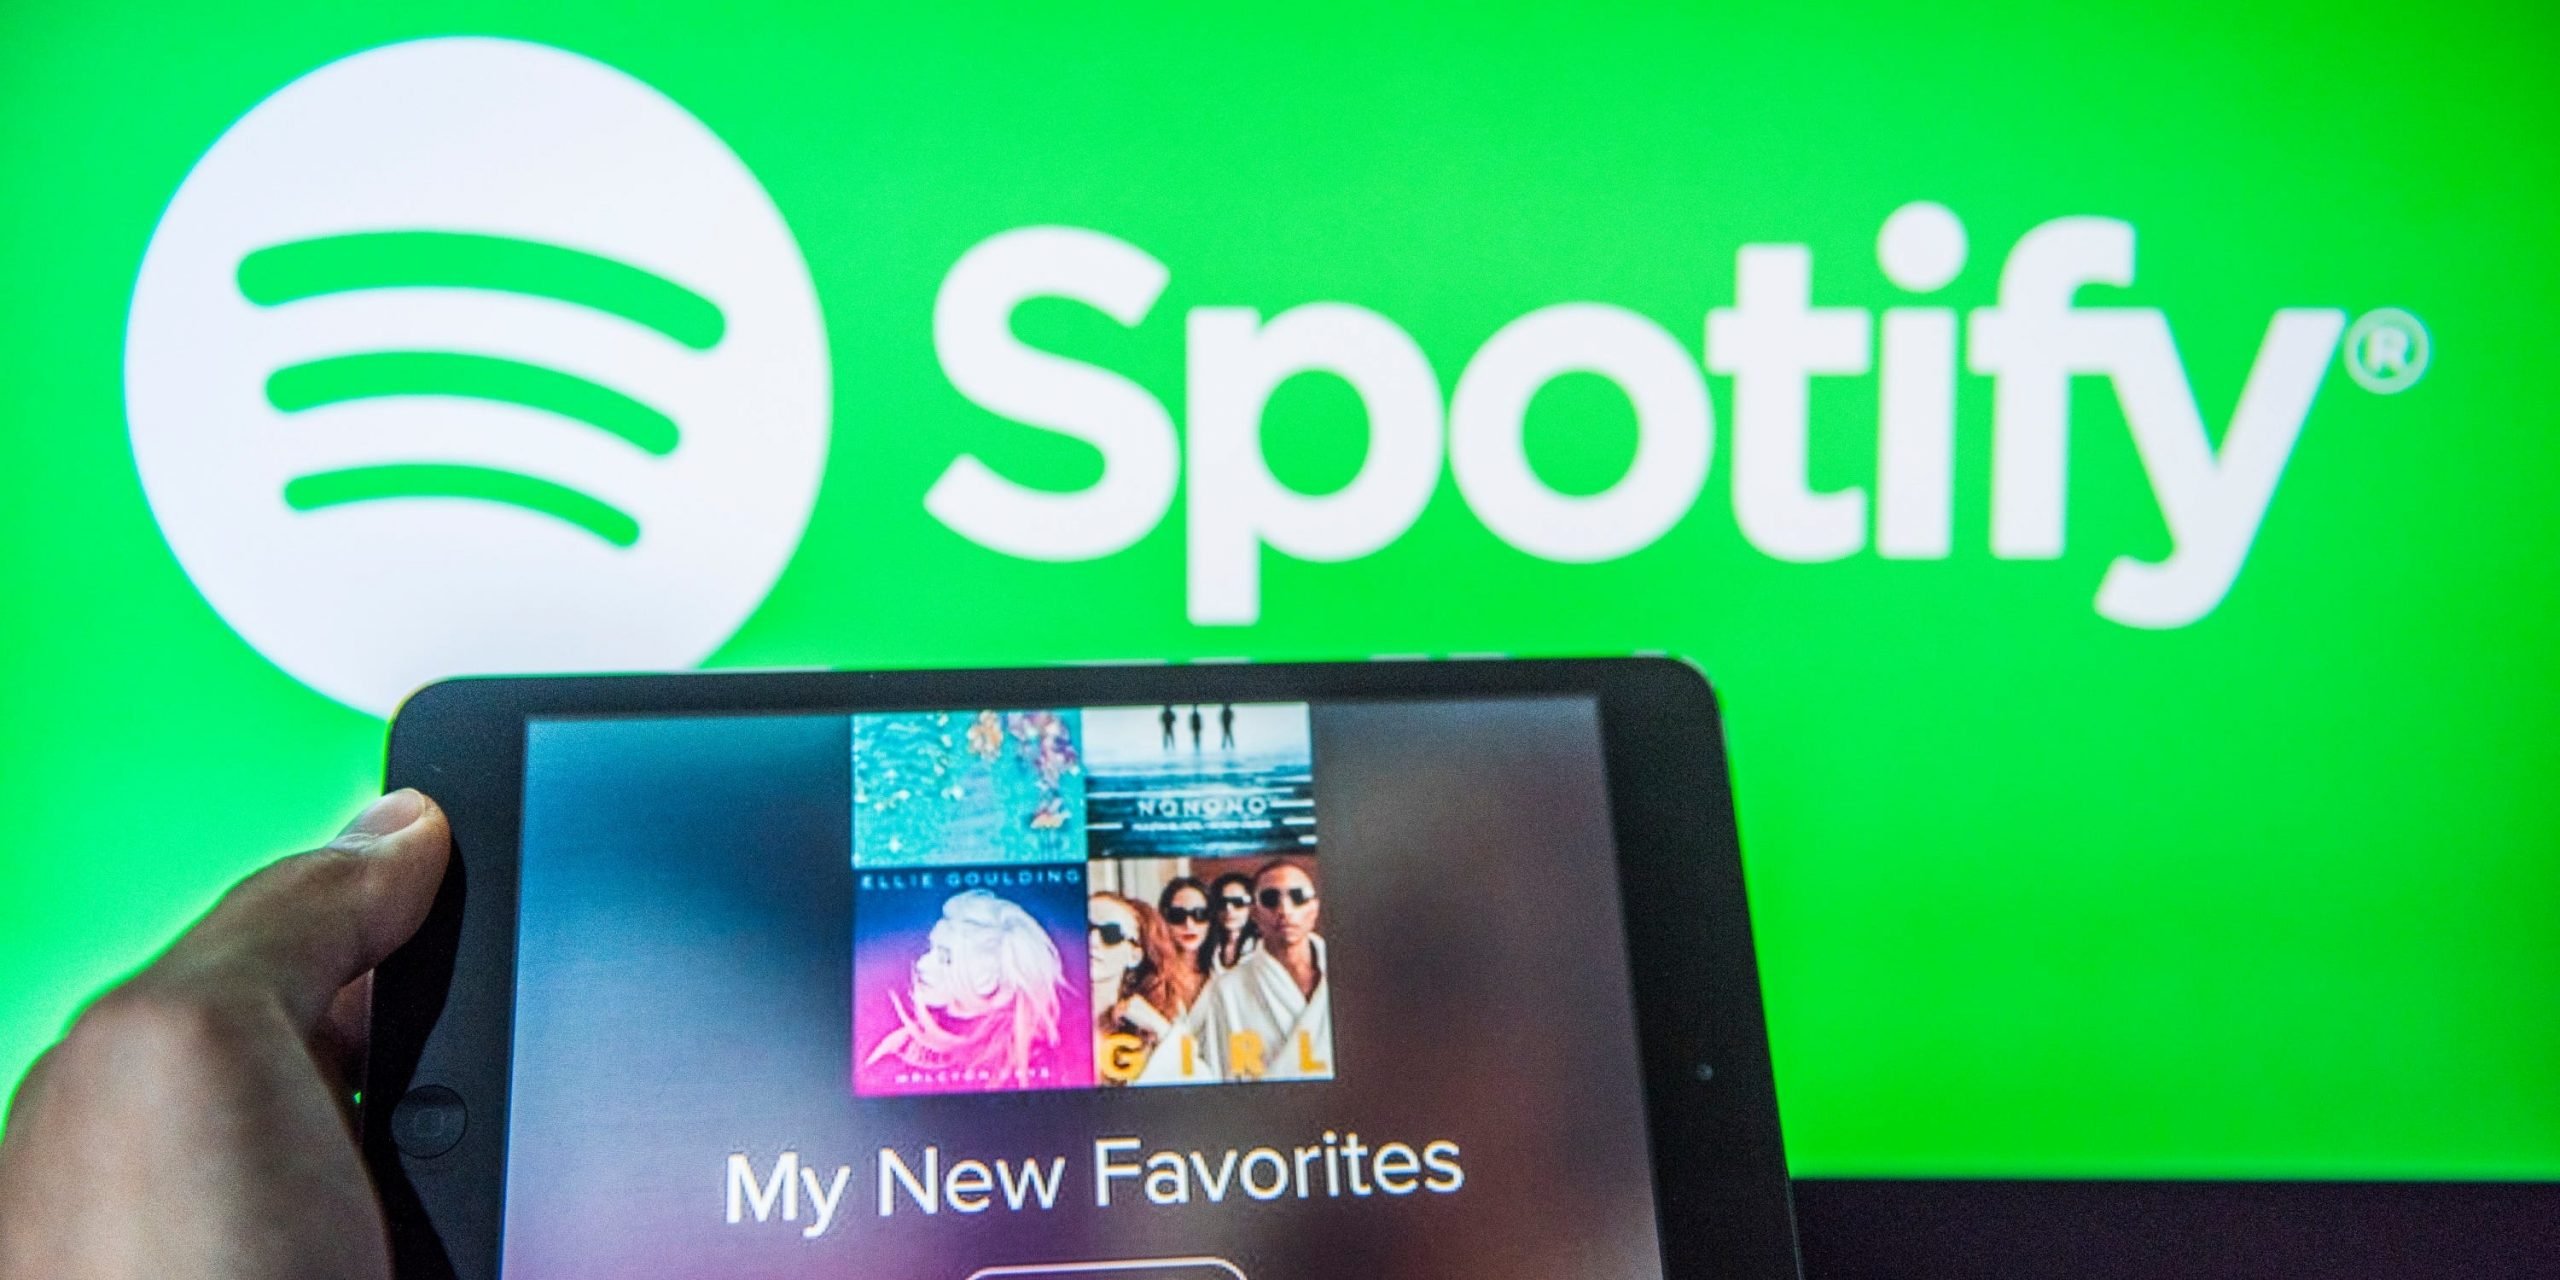 how to delete spotify account on movile